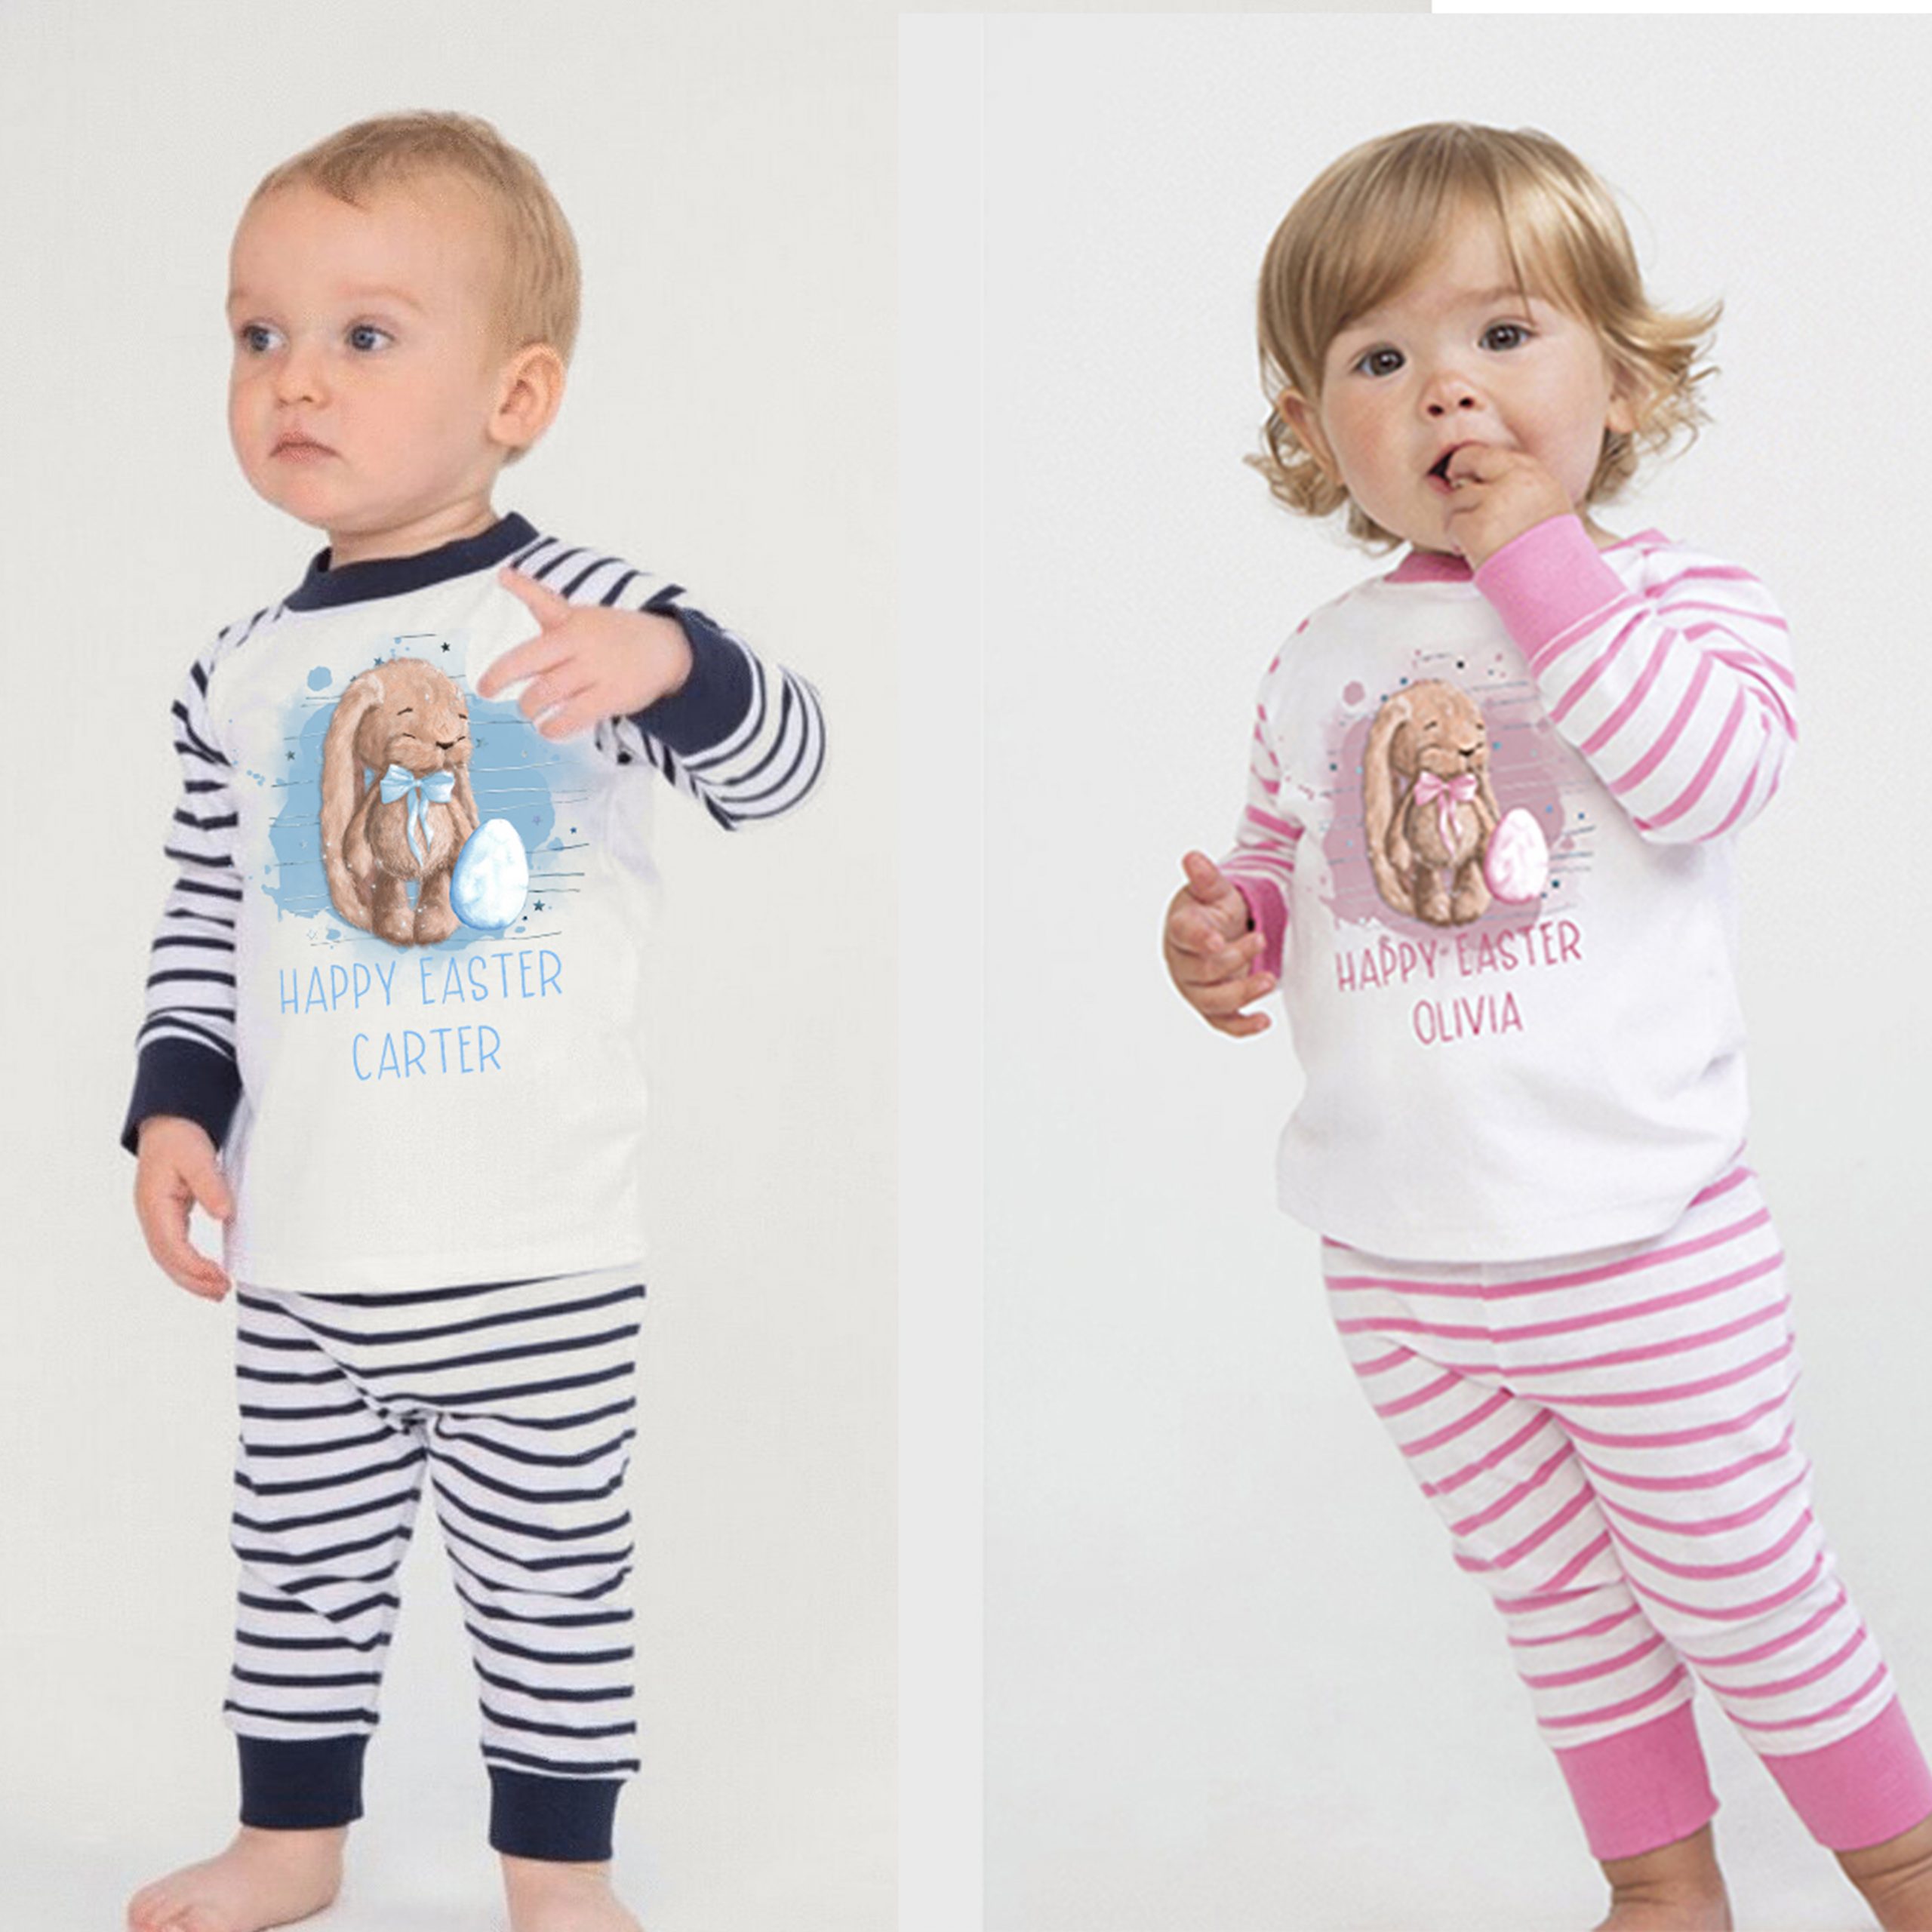 Baby Easter Bunny Pjs in pink or blue with full permanent ink print with watercolour rabbit and bunny, personalised with name, first easter